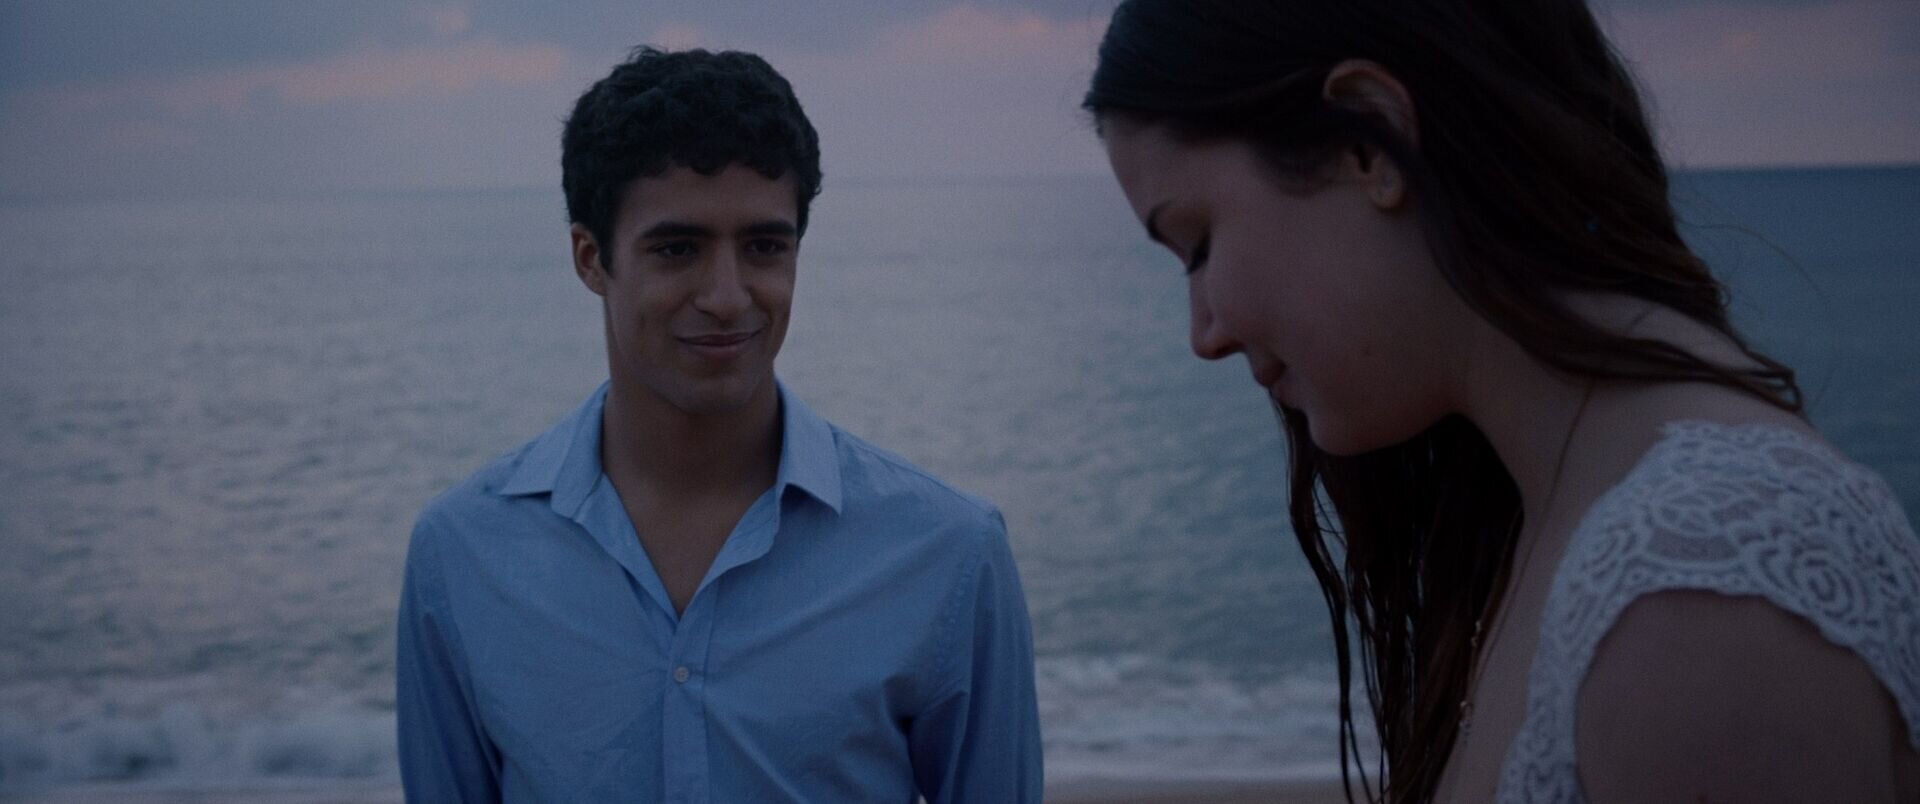 Stills from Mektoub, My Love: Canto Uno.